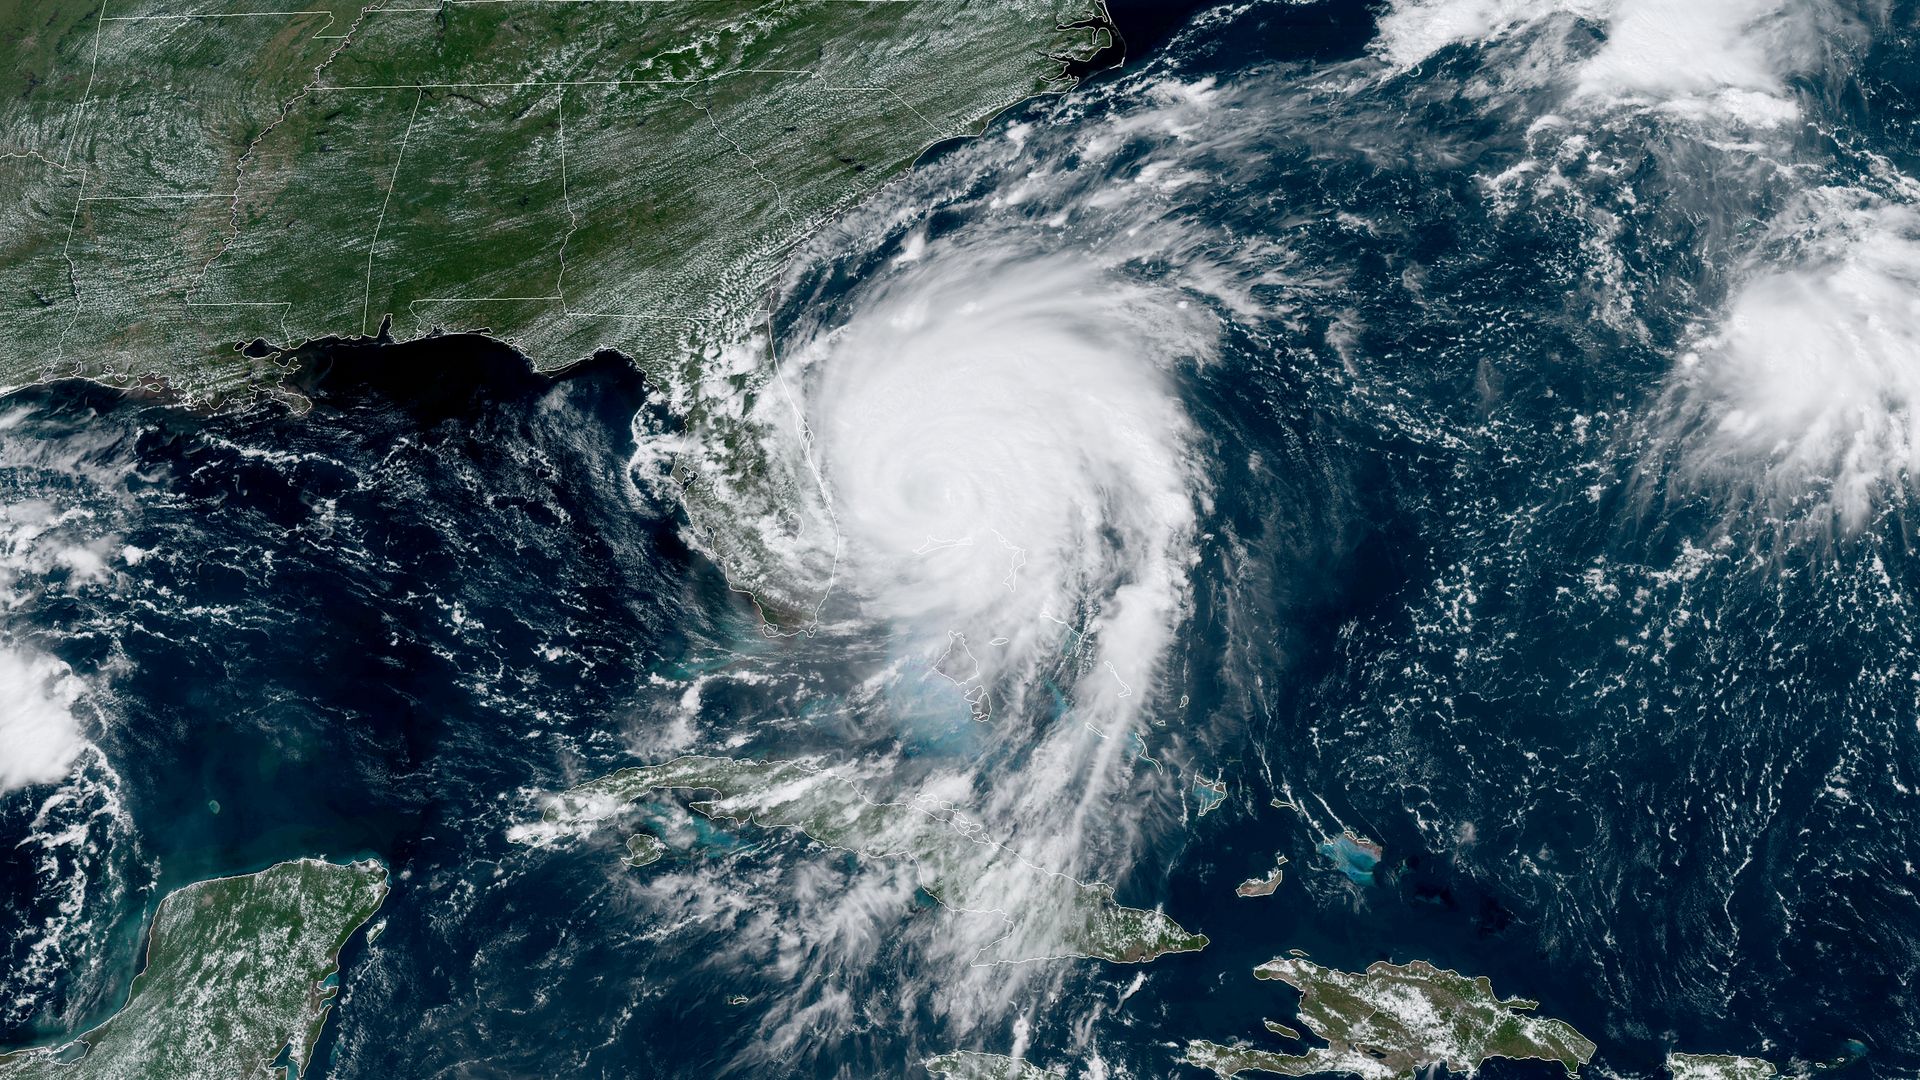 This image shows a satellite view of Hurricane Dorian approaching Florida and the East Coast.